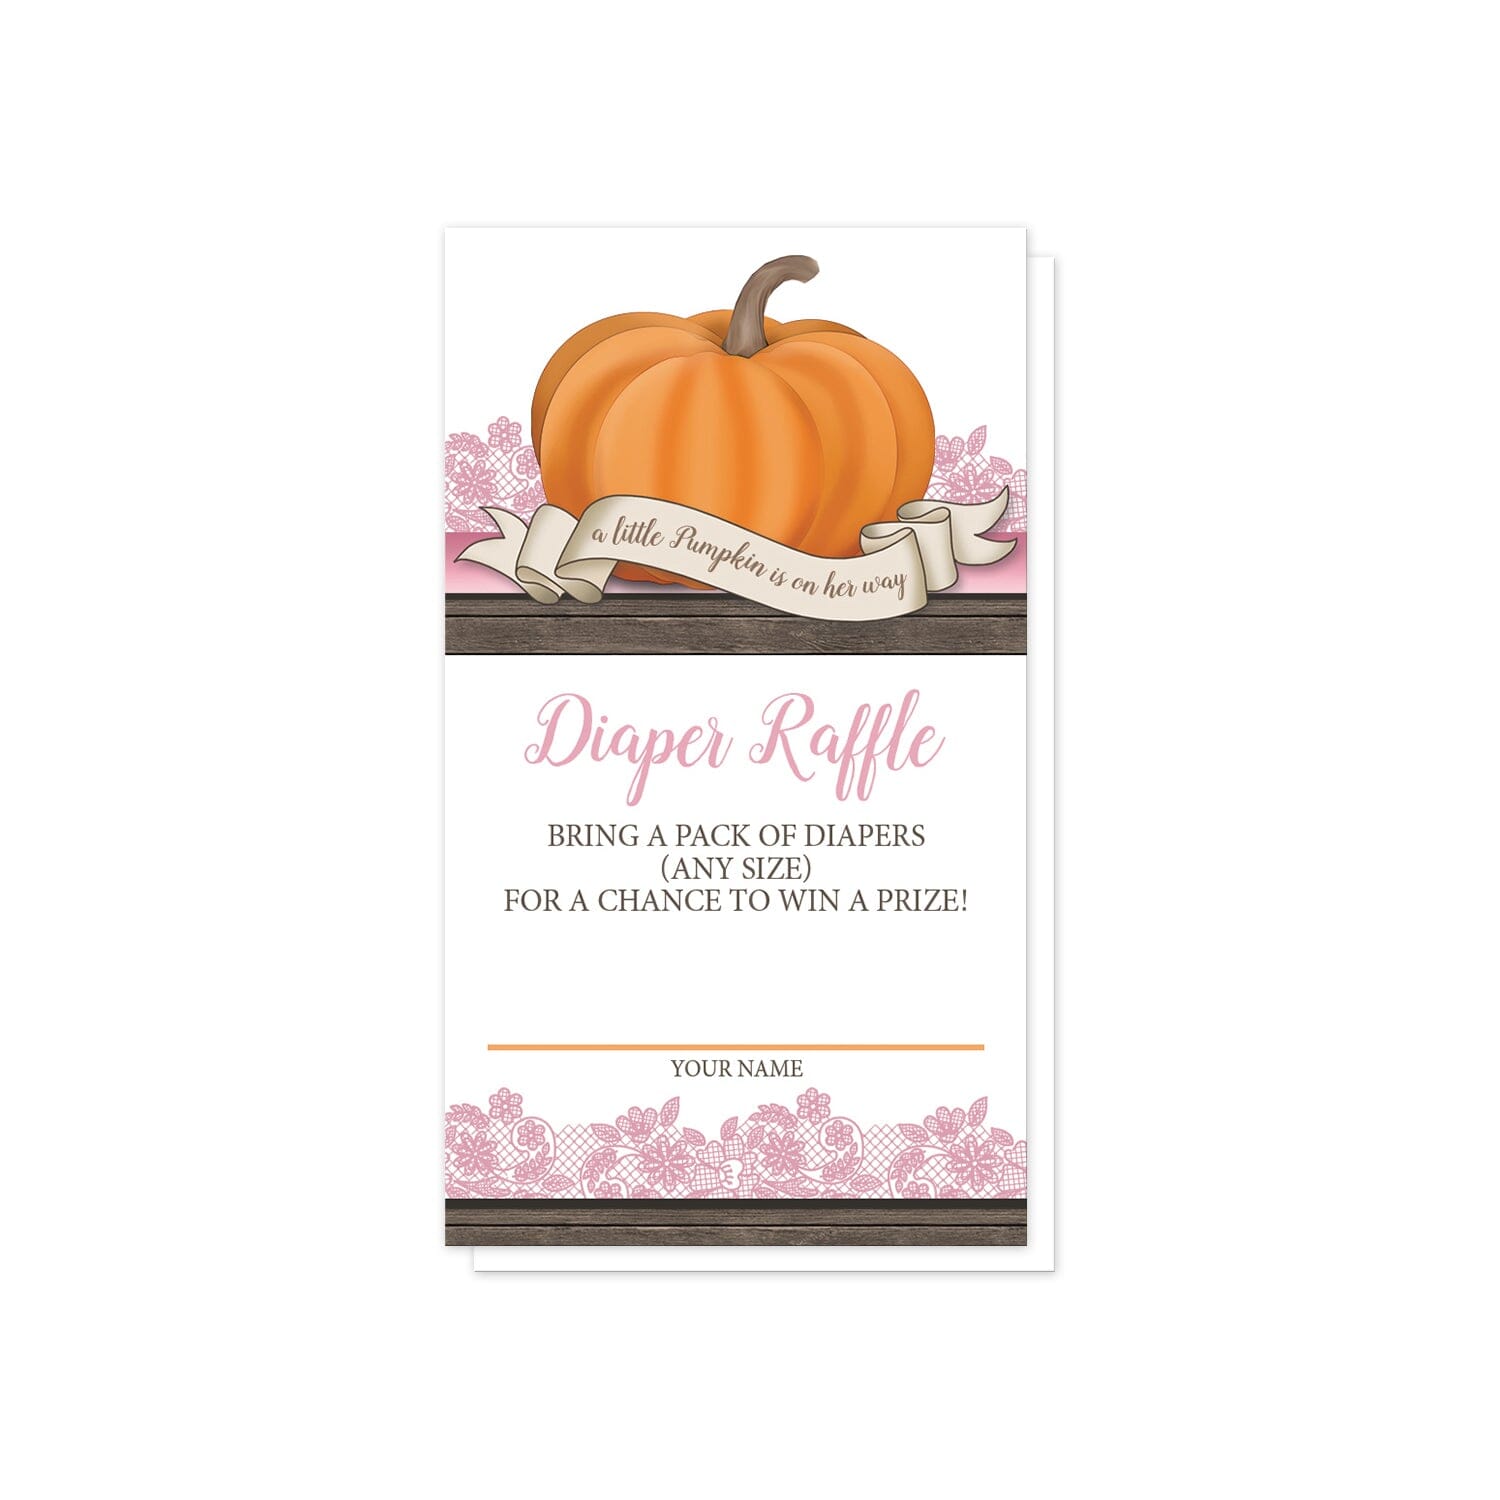 Rustic Orange Pink Pumpkin Diaper Raffle Cards at Artistically Invited. Cute rustic orange pink pumpkin diaper raffle cards with an illustration of an orange pumpkin on a horizontal pink stripe and a wood stripe with pink lace behind it, and a tiny ribbon banner that reads: "a little pumpkin is on her way". Your diaper raffle details are printed in pink and brown in the white area of the cards below the pumpkin. 